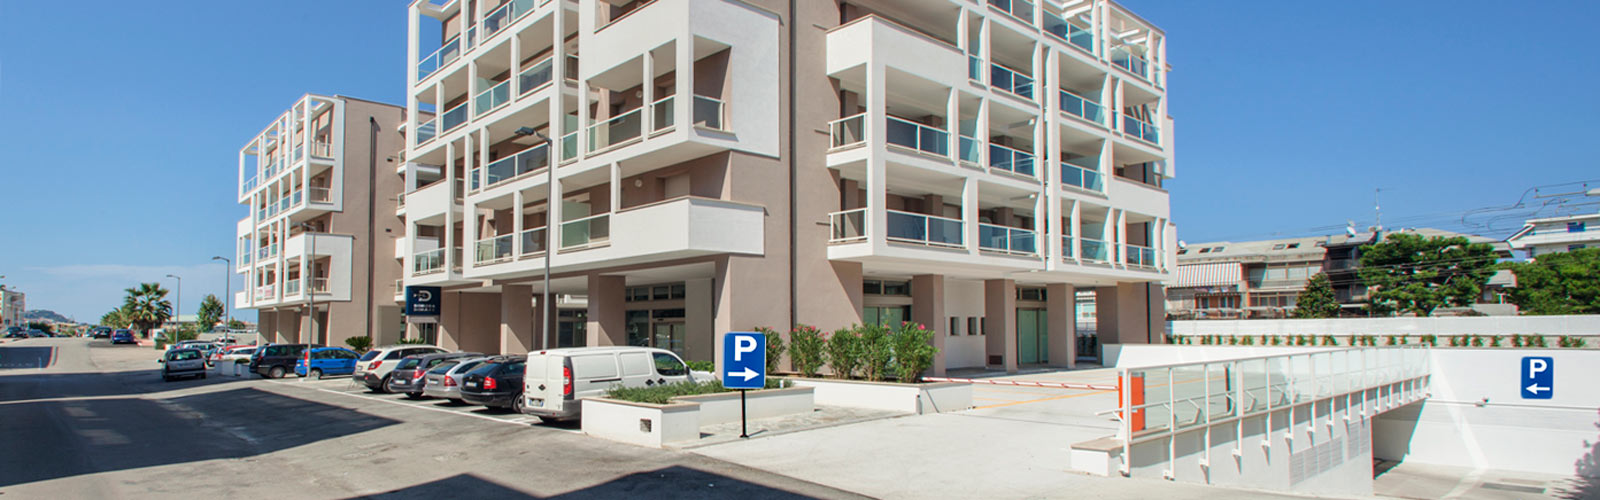 san benedetto del tronto residence